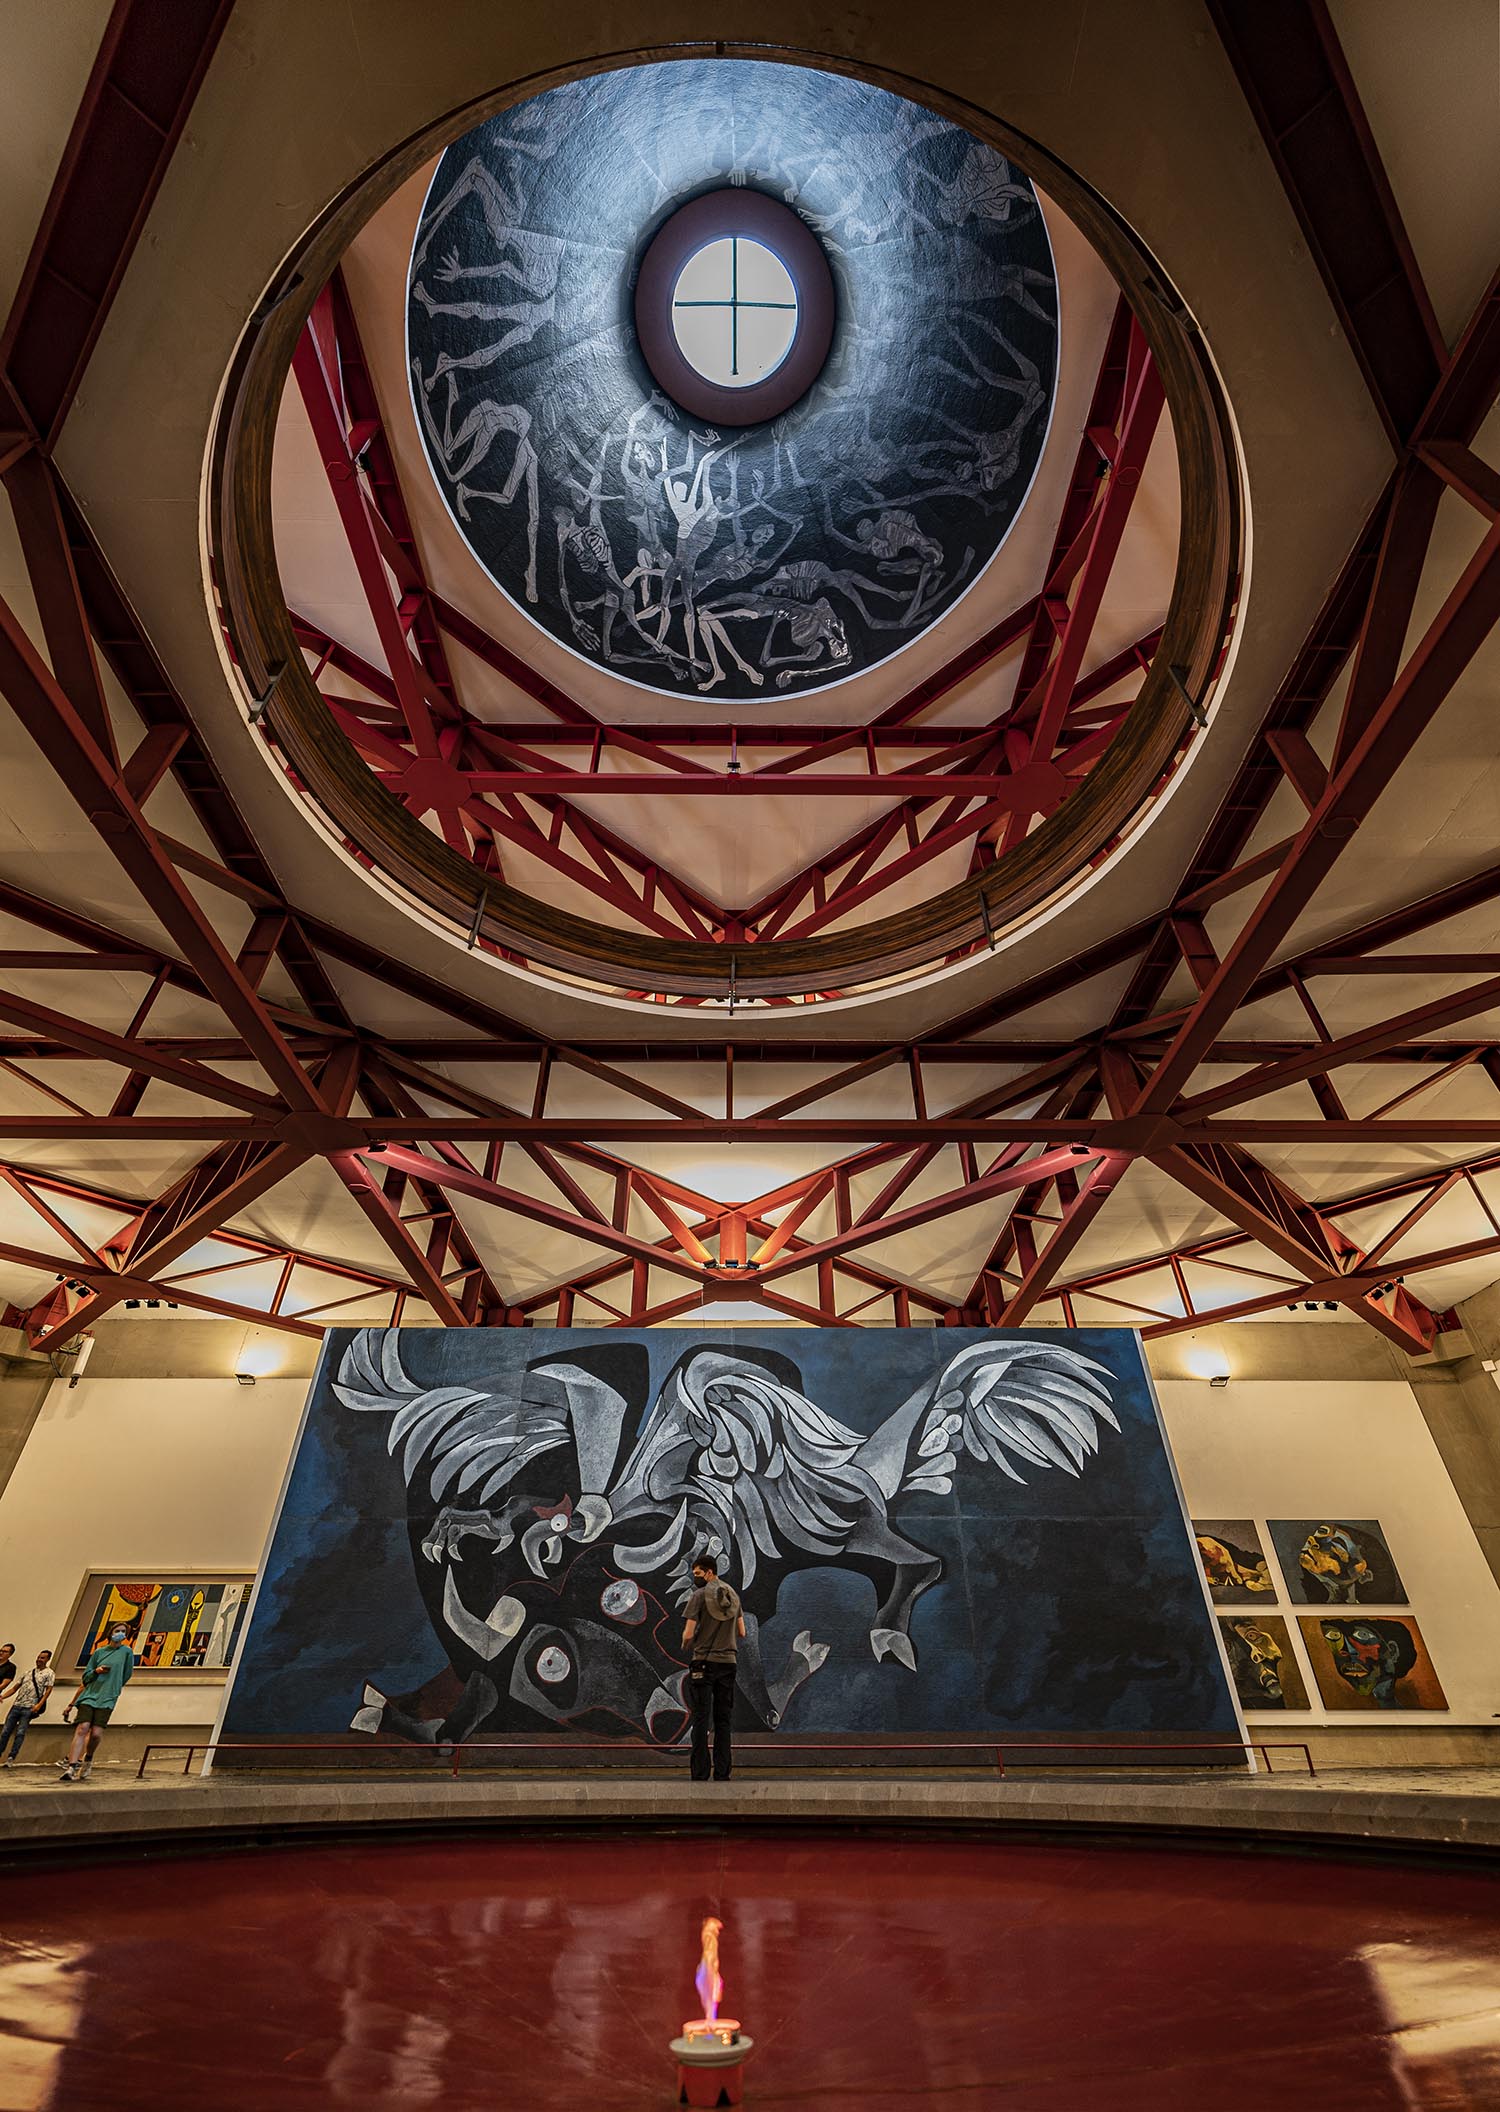 A student standing in front of a large, black and white abstract paining of a winged bull. Overhead red scaffolding surrounds a domed mural of skeletal figures in various states of contortion.